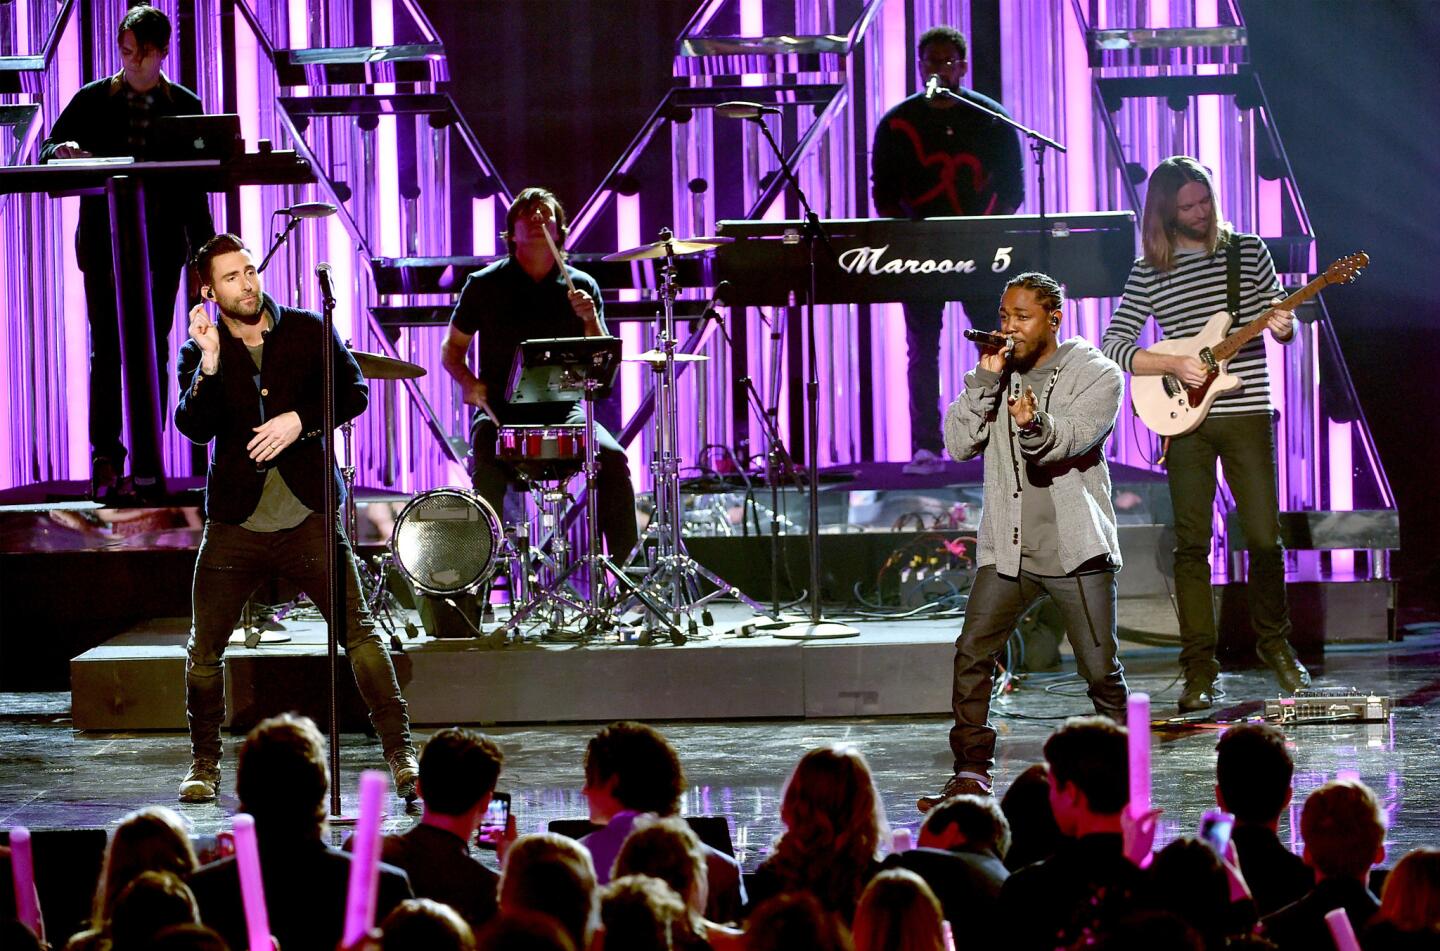 Singer Adam Levine of Maroon 5, left, and rapper Kendrick Lamar perform onstage during the 2016 American Music Awards at Microsoft Theater in Los Angeles, California.